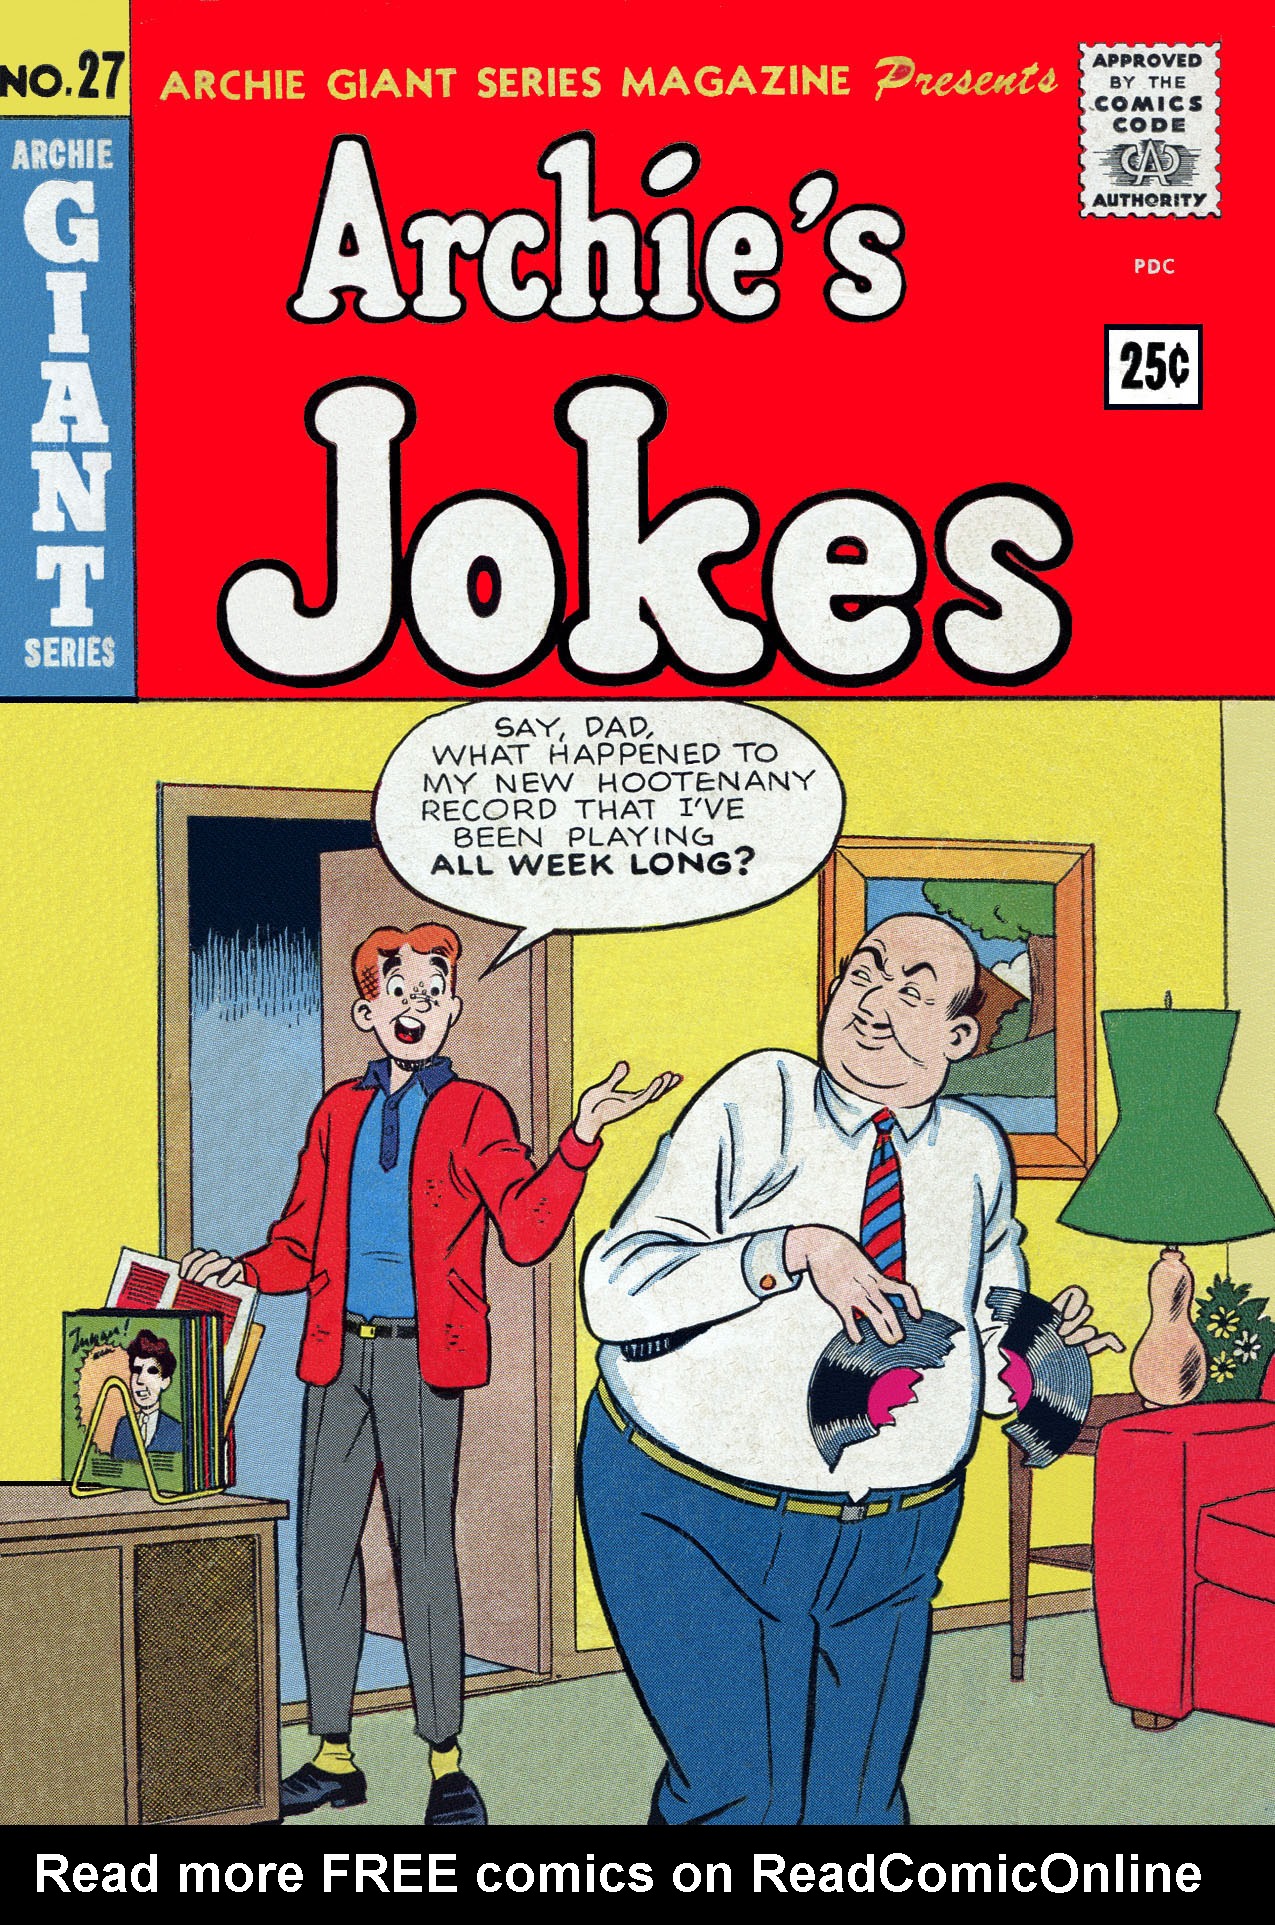 Read online Archie Giant Series Magazine comic -  Issue #27 - 1